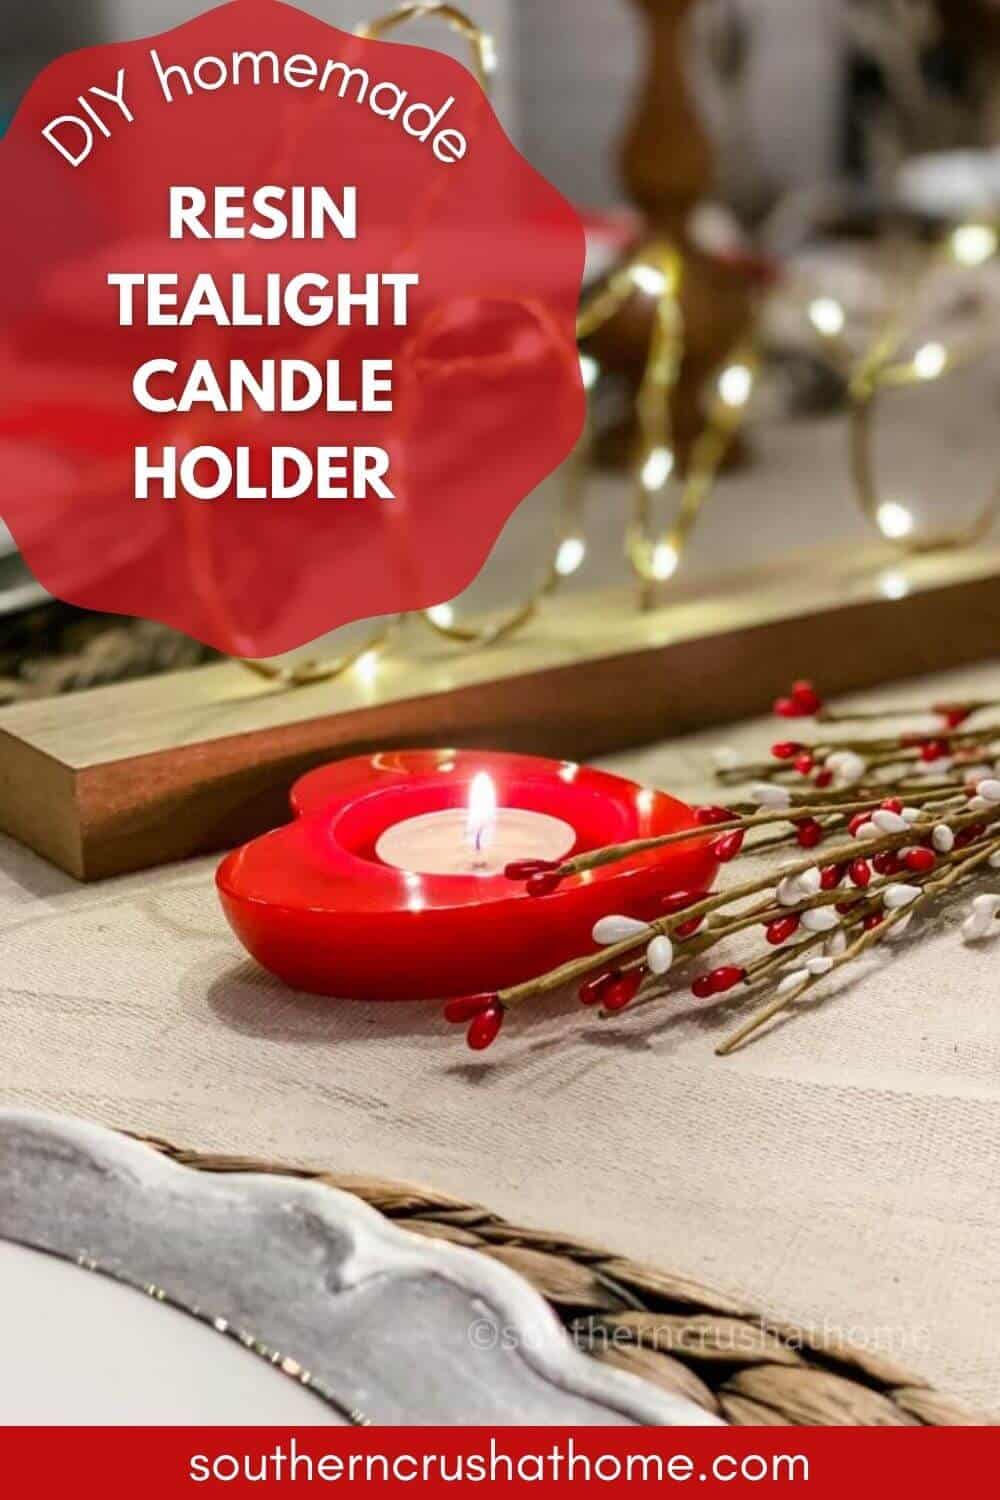 https://www.southerncrushathome.com/wp-content/uploads/2022/02/Resin-Tealight-Candle-Holder.jpg